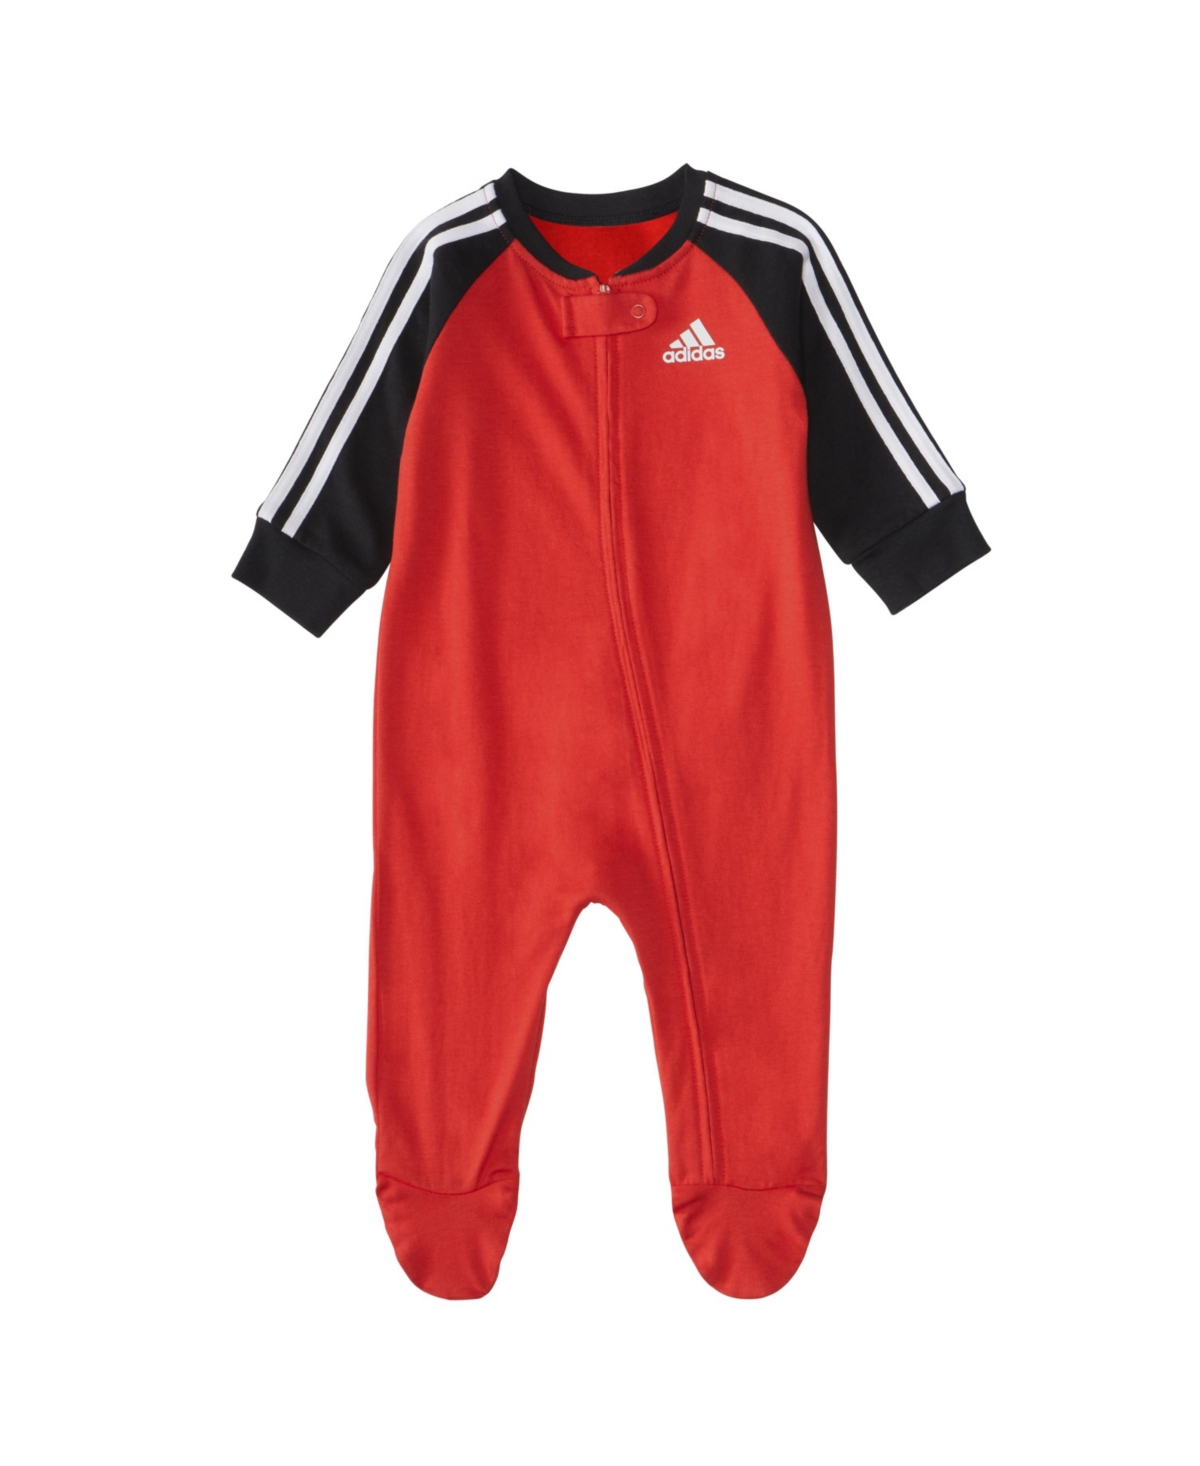 ADIDAS ORIGINALS BABY BOYS OR BABY GIRLS CLASSIC 3 STRIPE RAGLAN FOOTED COVERALL